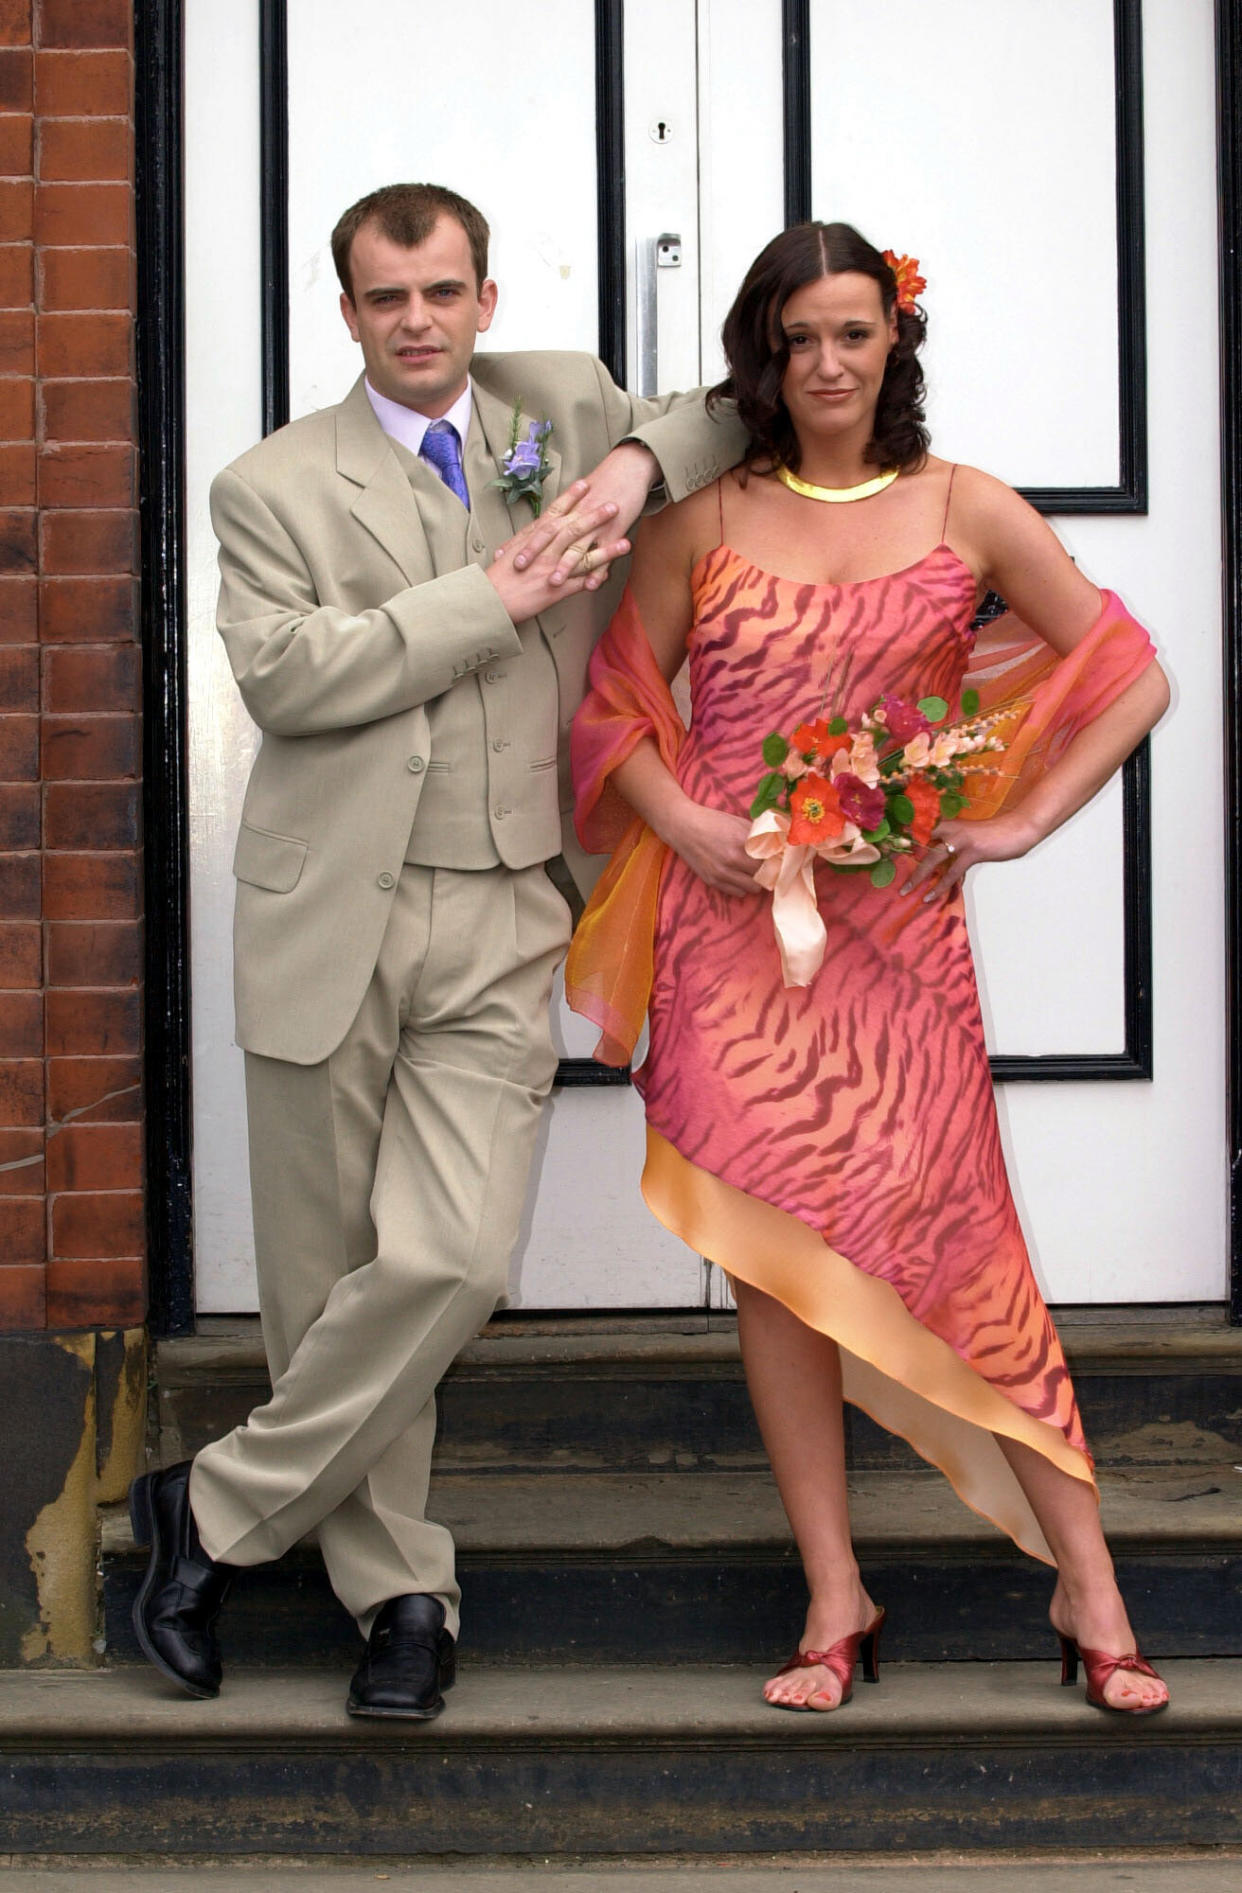 Coronation Street characters Steve McDonald, played by Simon Gregson and Karen Phillips, played by Suranne Jones after marrying at Salford Registry Office in Manchester.   (Photo by Haydn West - PA Images/PA Images via Getty Images)